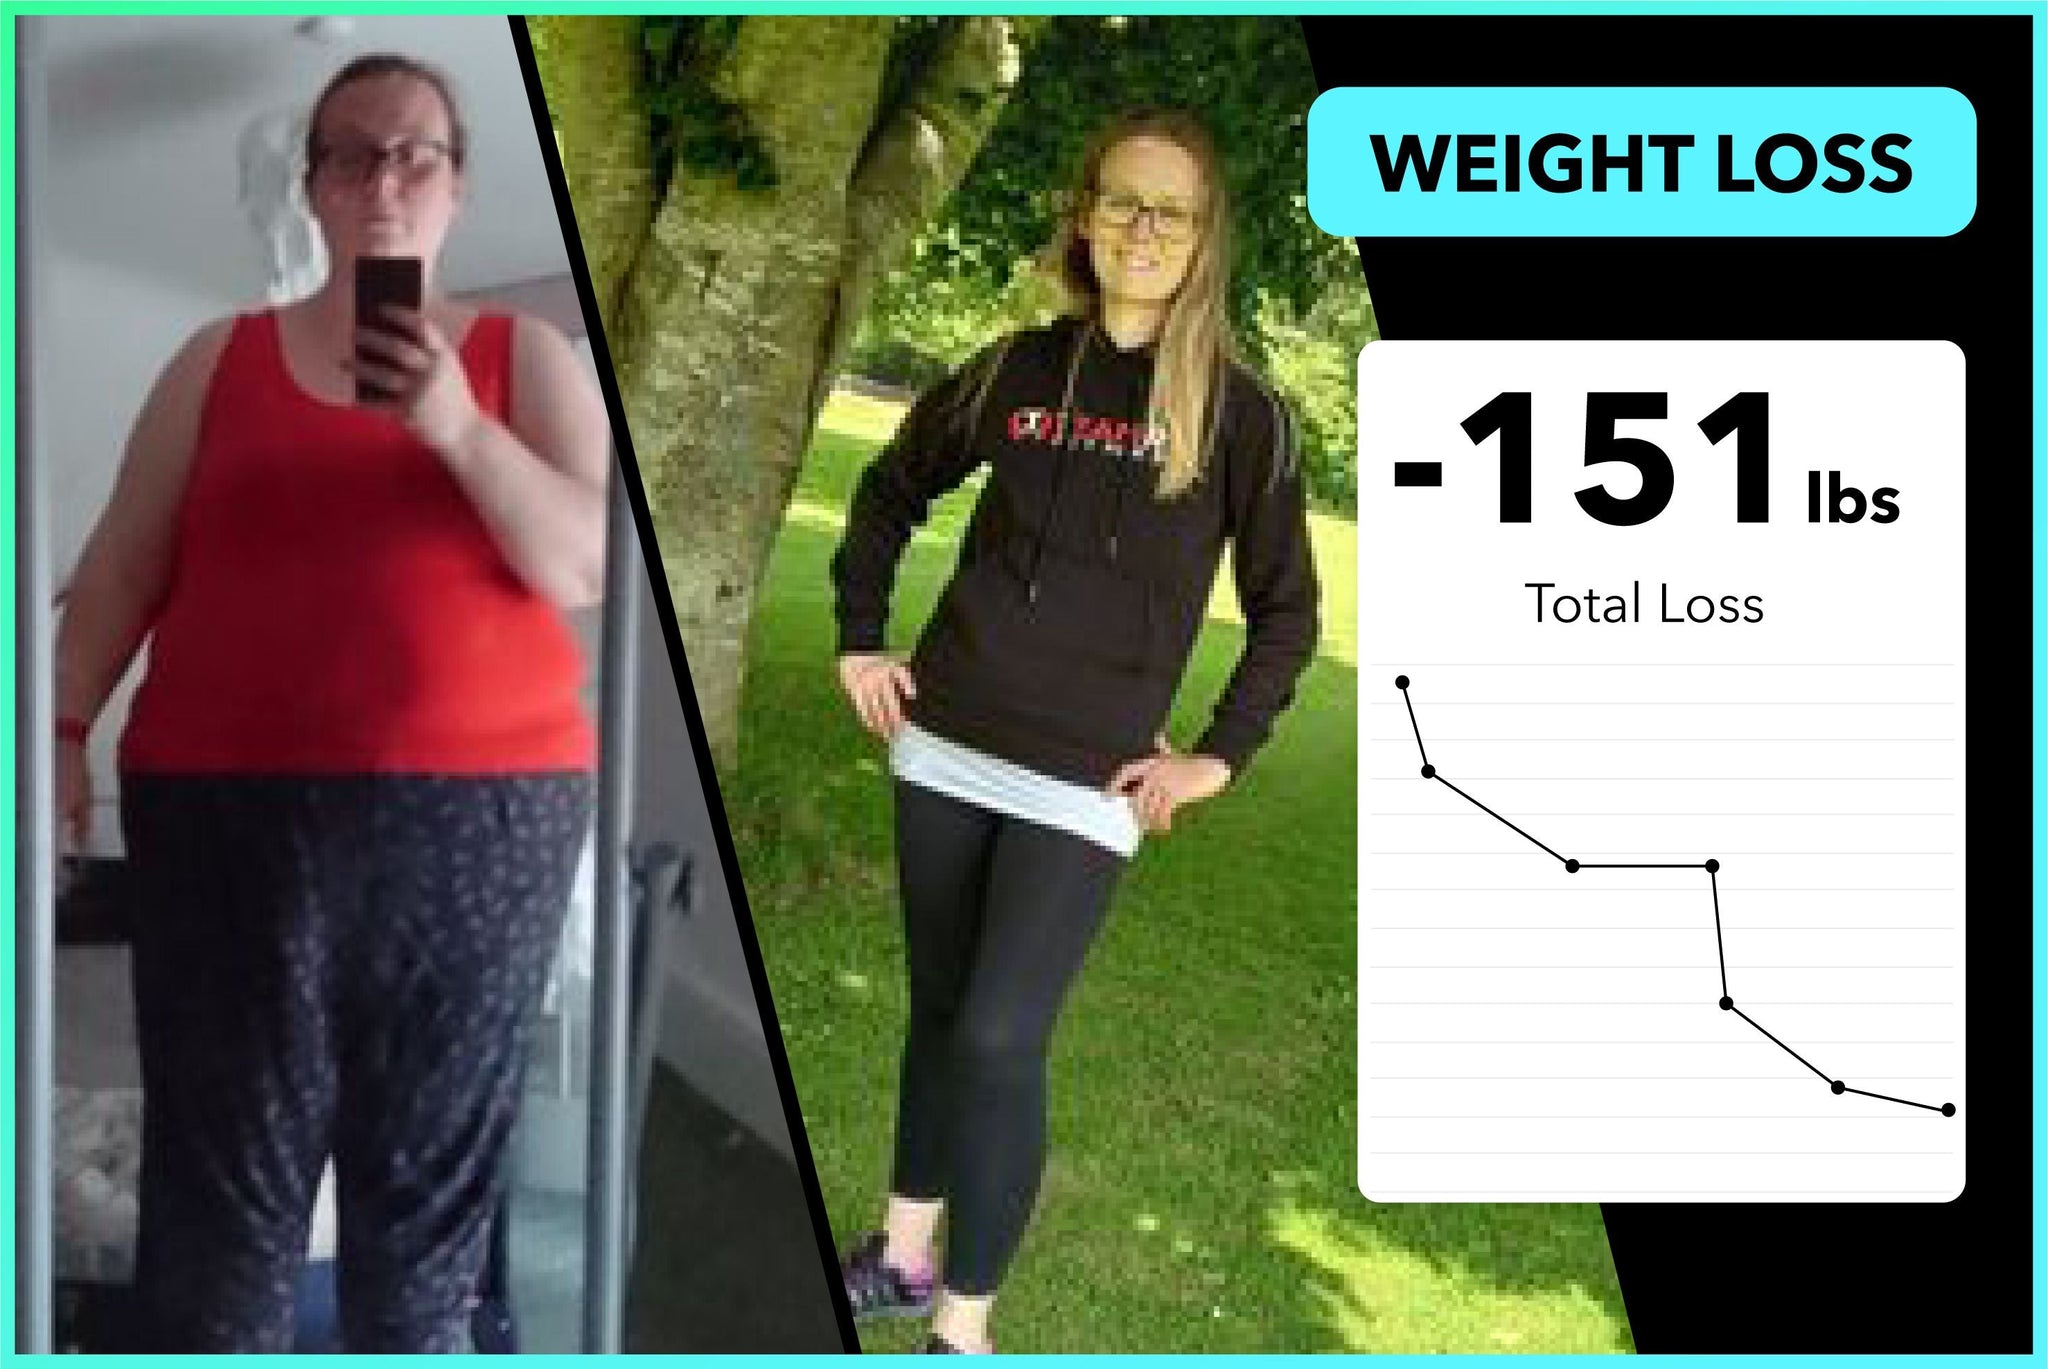 Here's how Laura lost 151lbs